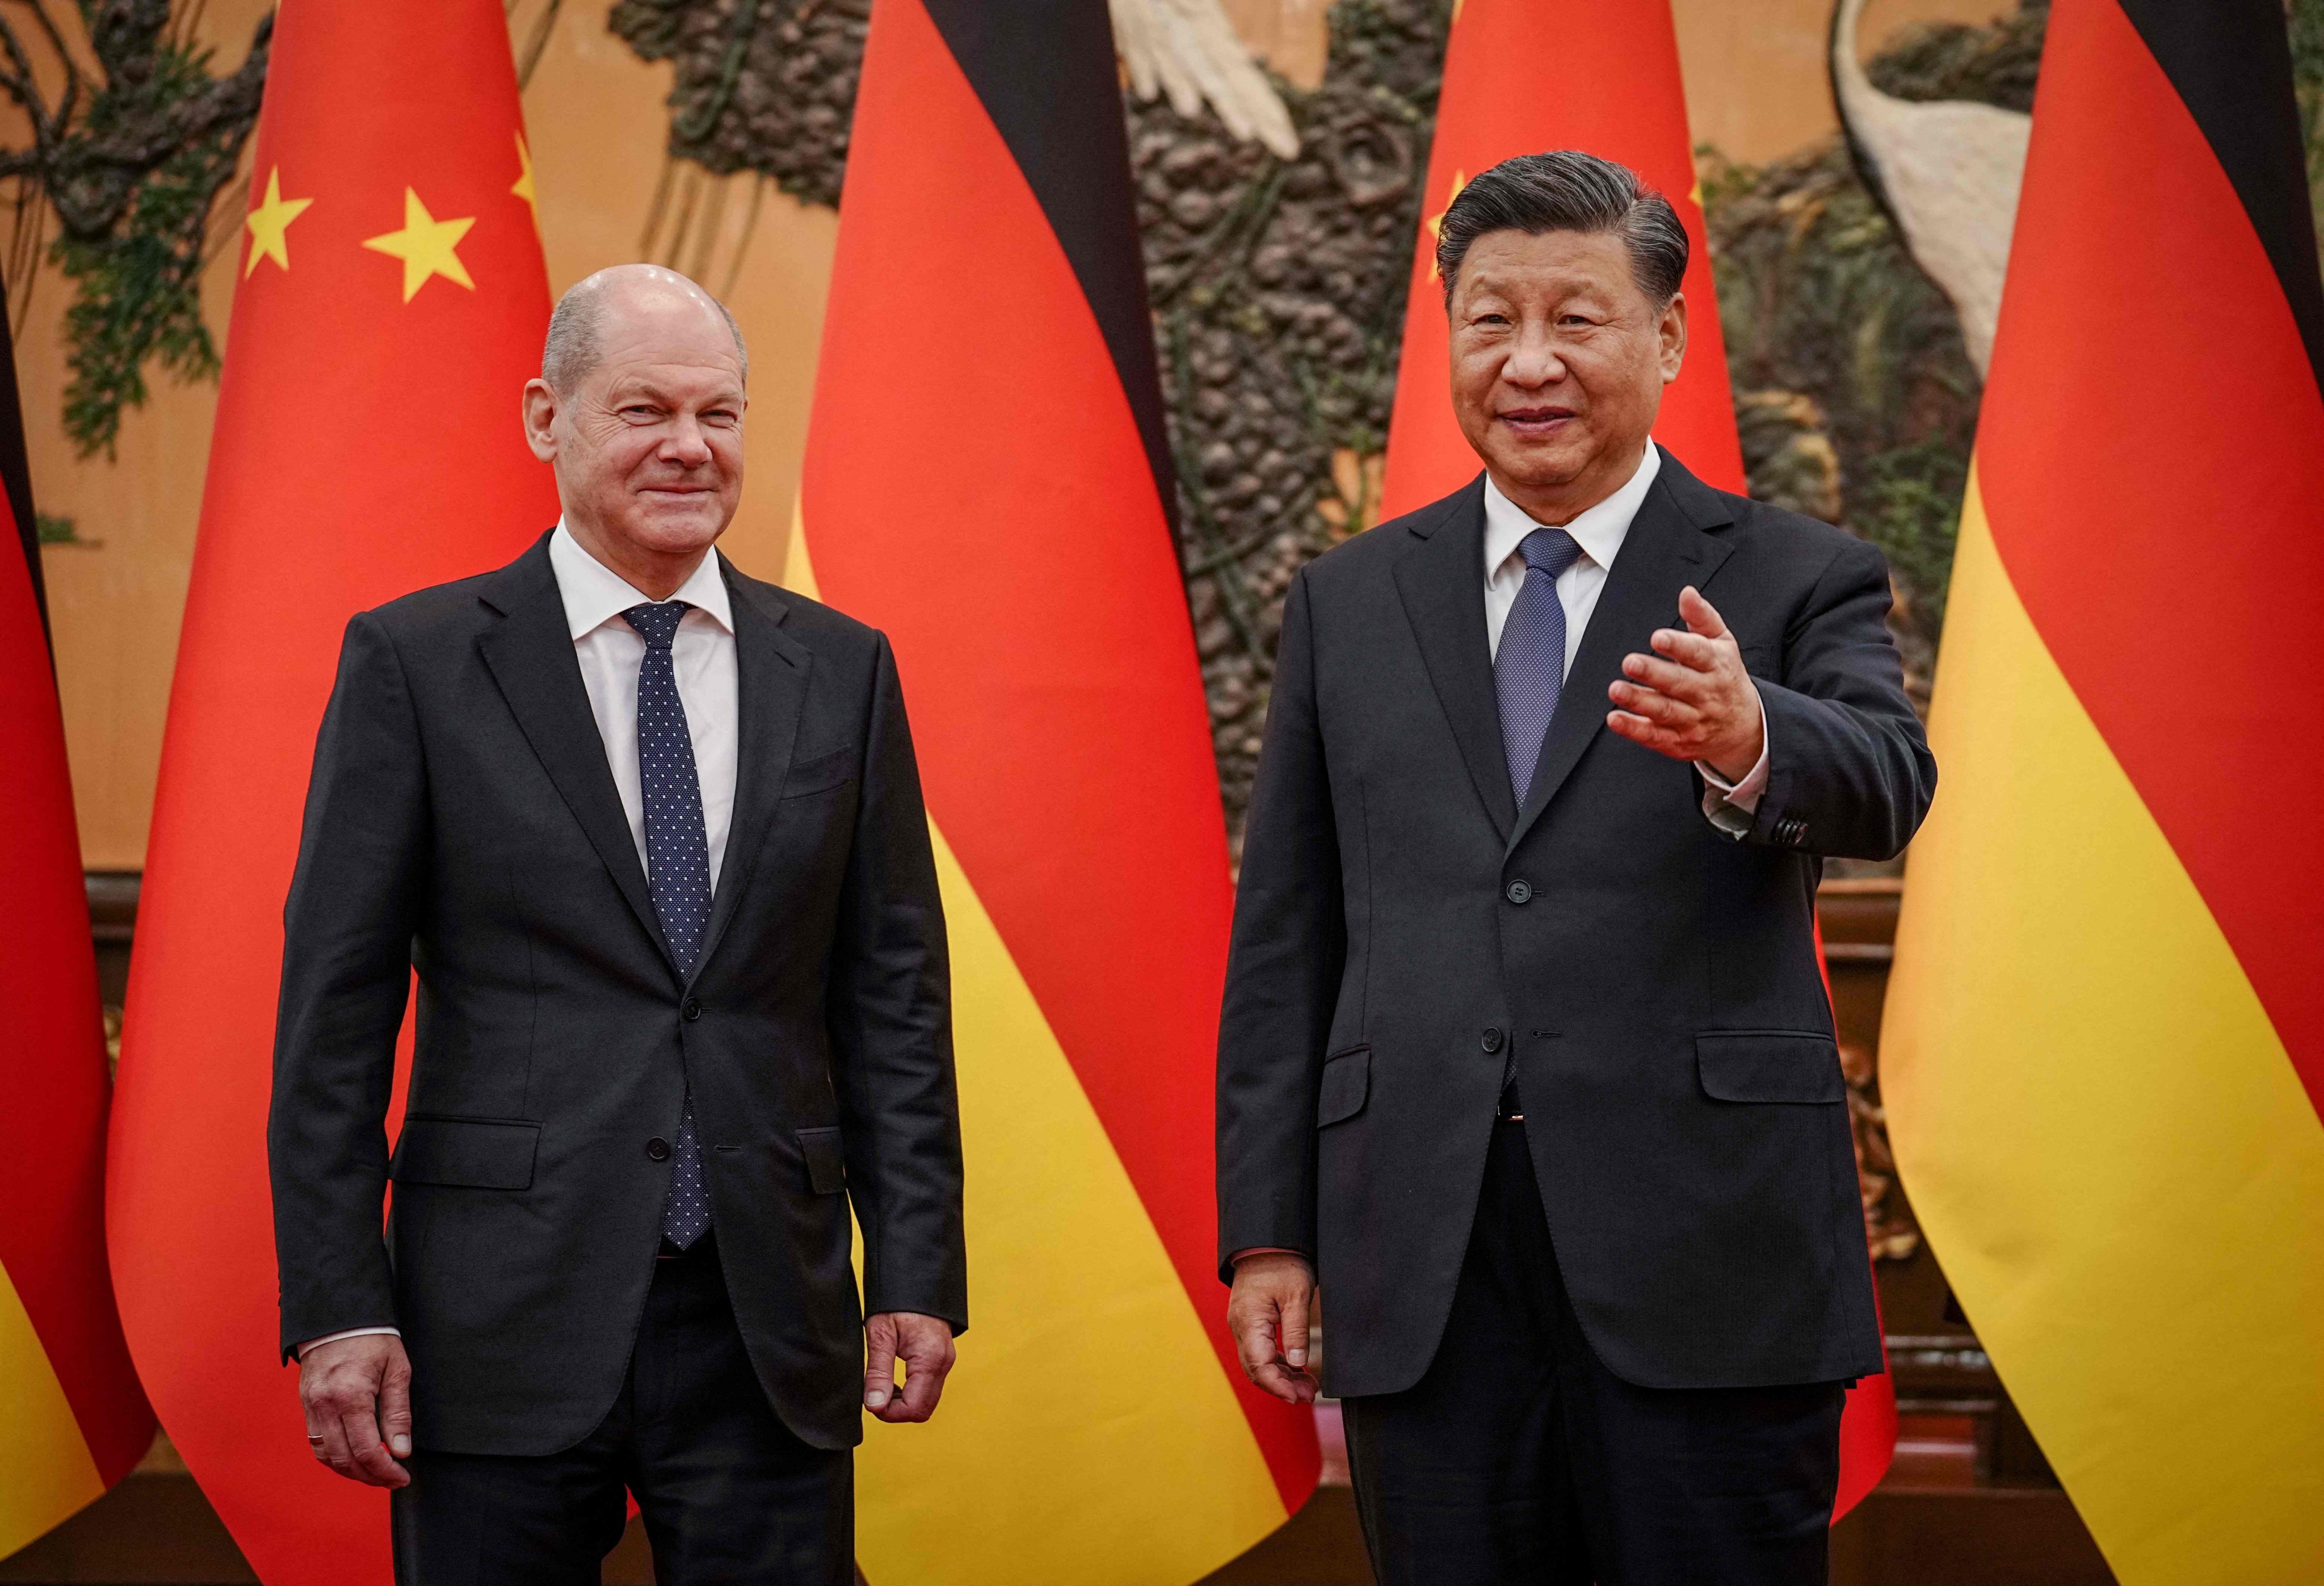 Chinese President Xi Jinping (right) welcomes German Chancellor Olaf Scholz at the Great Hall of the People in Beijing, on November 4. Photo: AFP